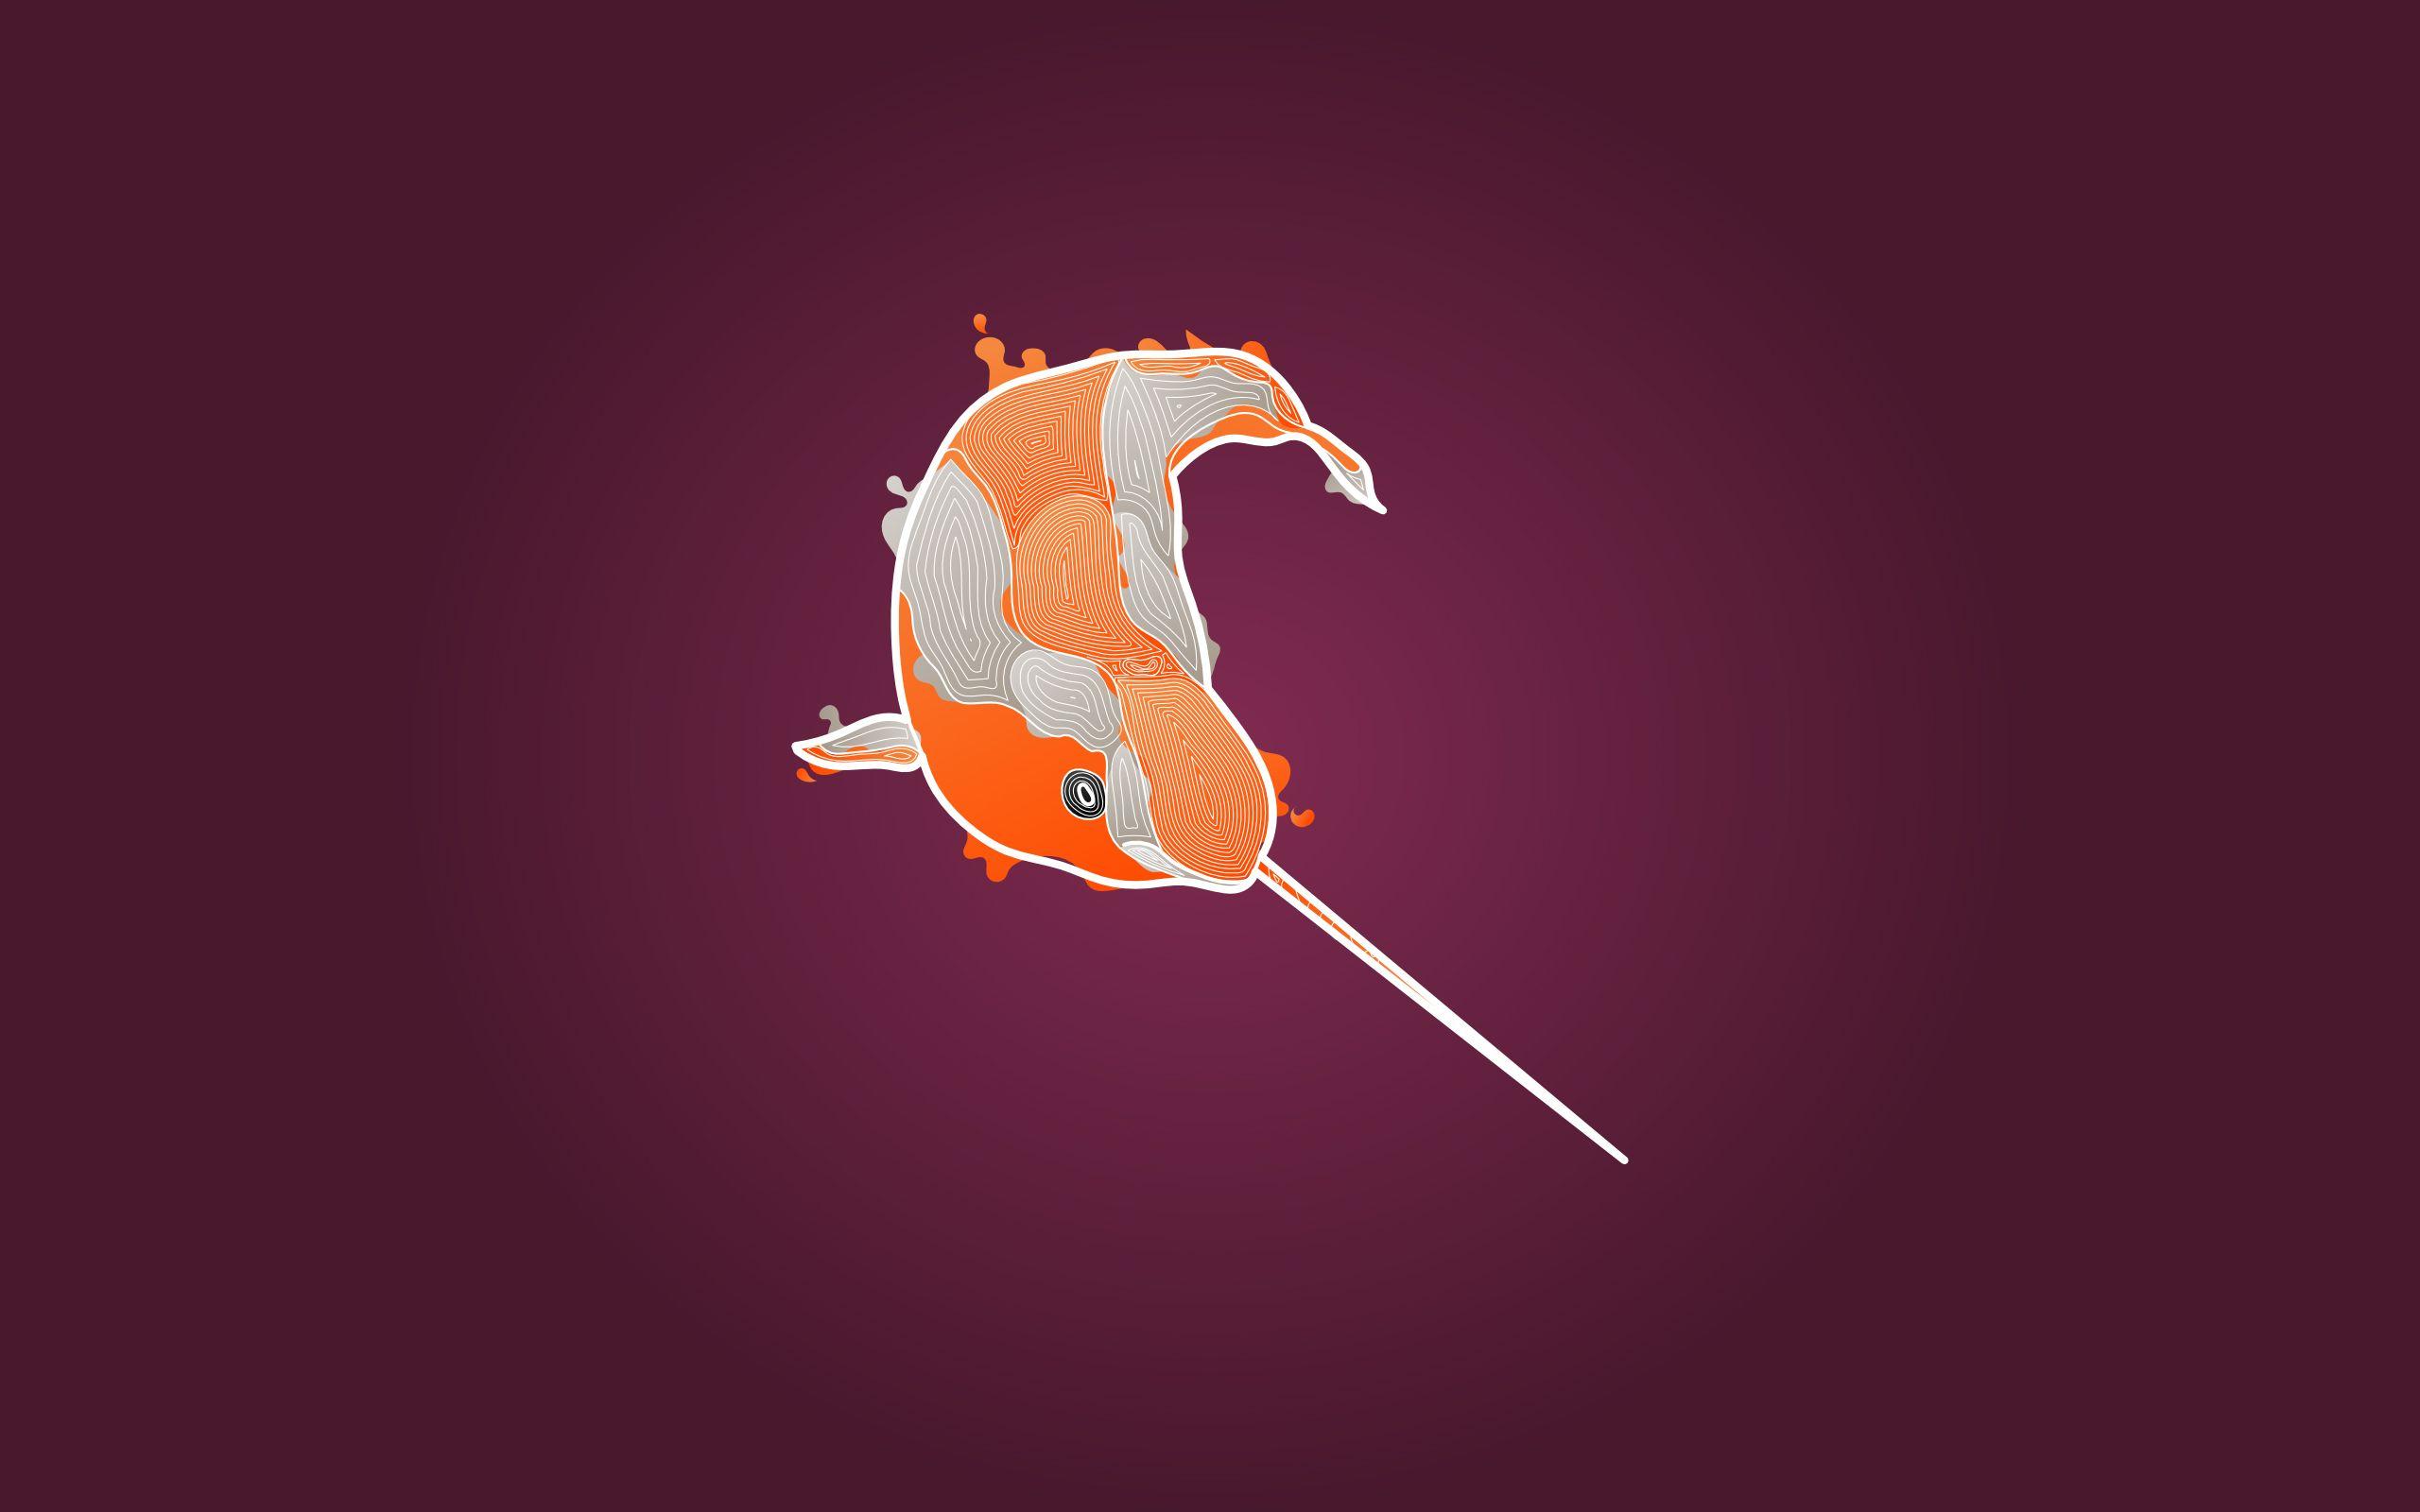 Download the Koi Narwhal Wallpaper, Koi Narwhal iPhone Wallpaper